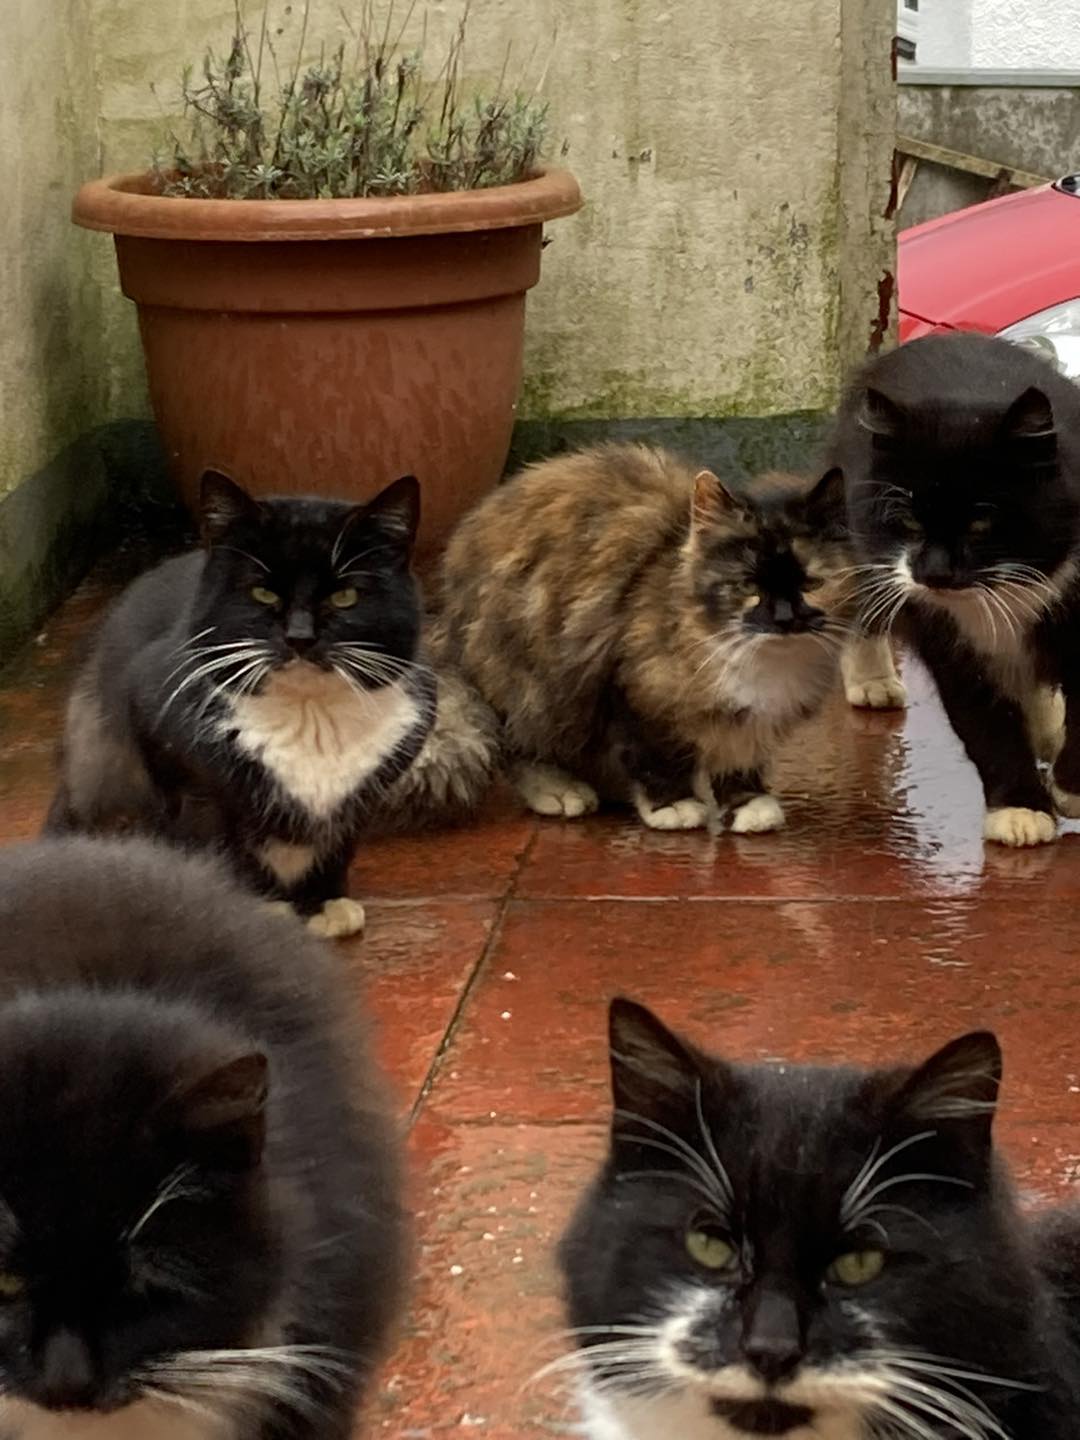 The group of approximately 20 cats are proving a challenge to manage say volunteers. Photo: WISCK.